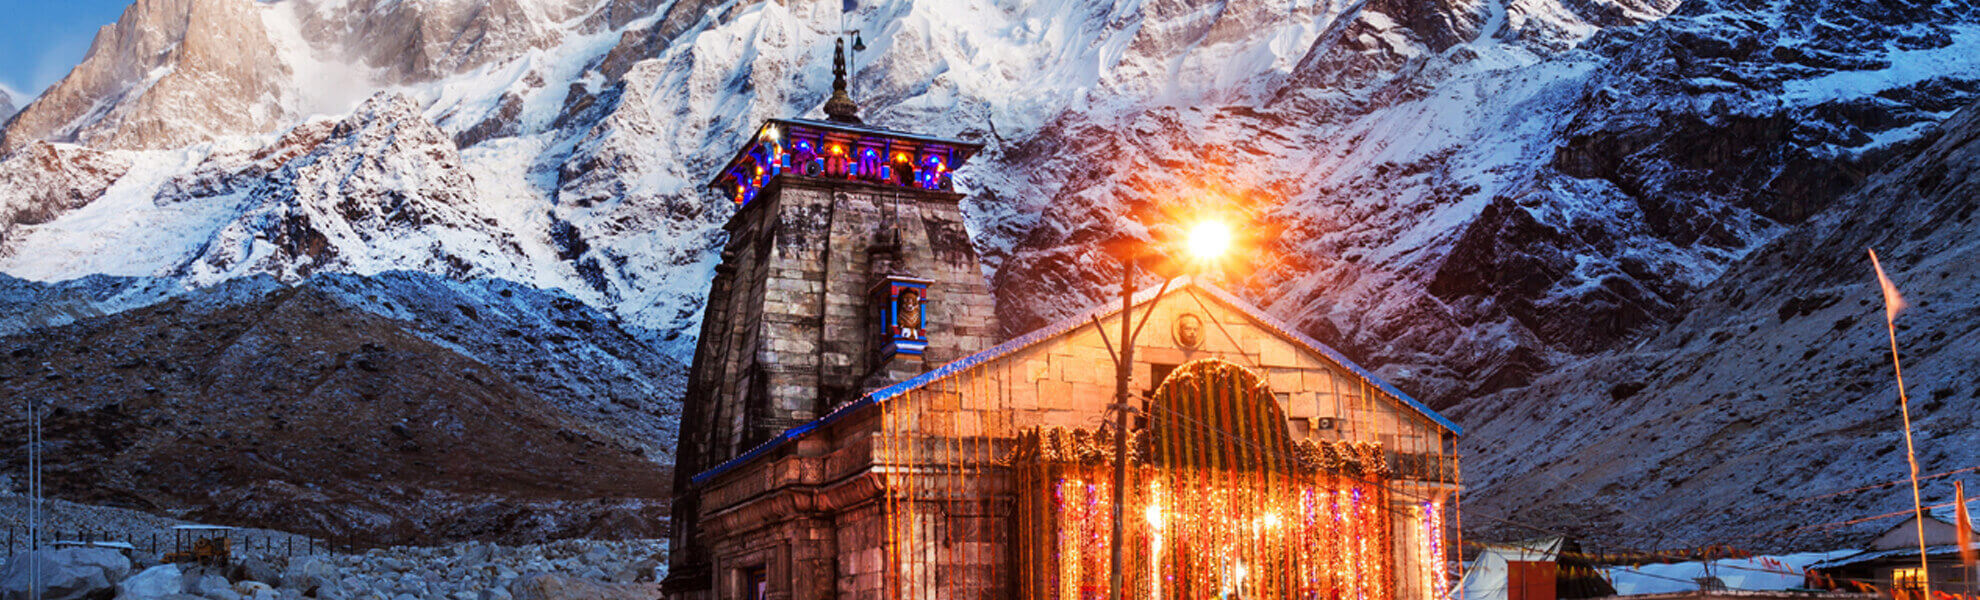 Chardham Yatra with Helicopter Tour